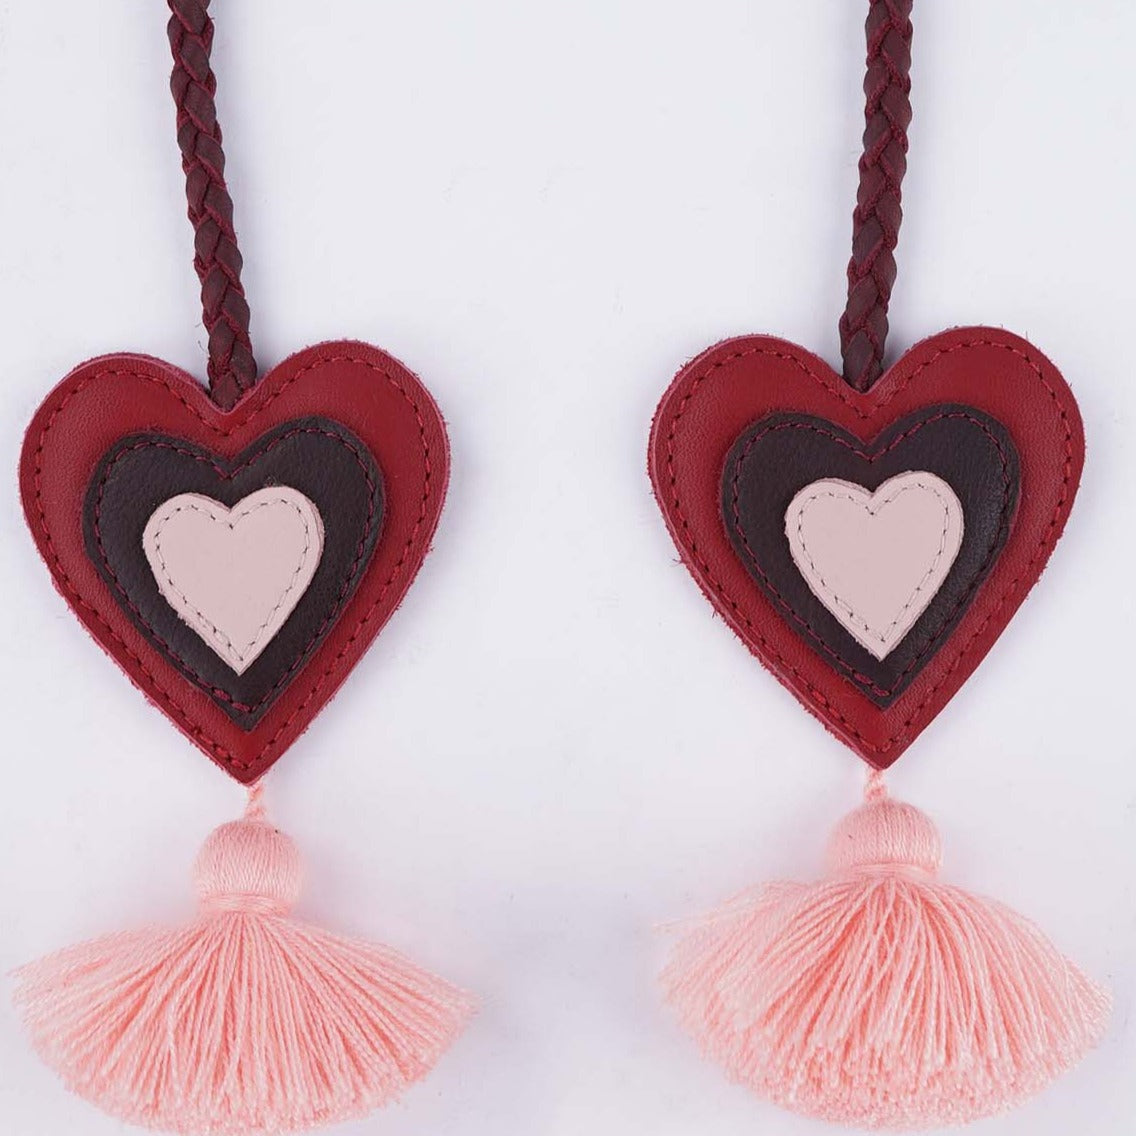 DOUBLE STACKED HEART TASSEL - ACCESSORIES COLLECTION - PRIMROSE & CHILI PEPPER